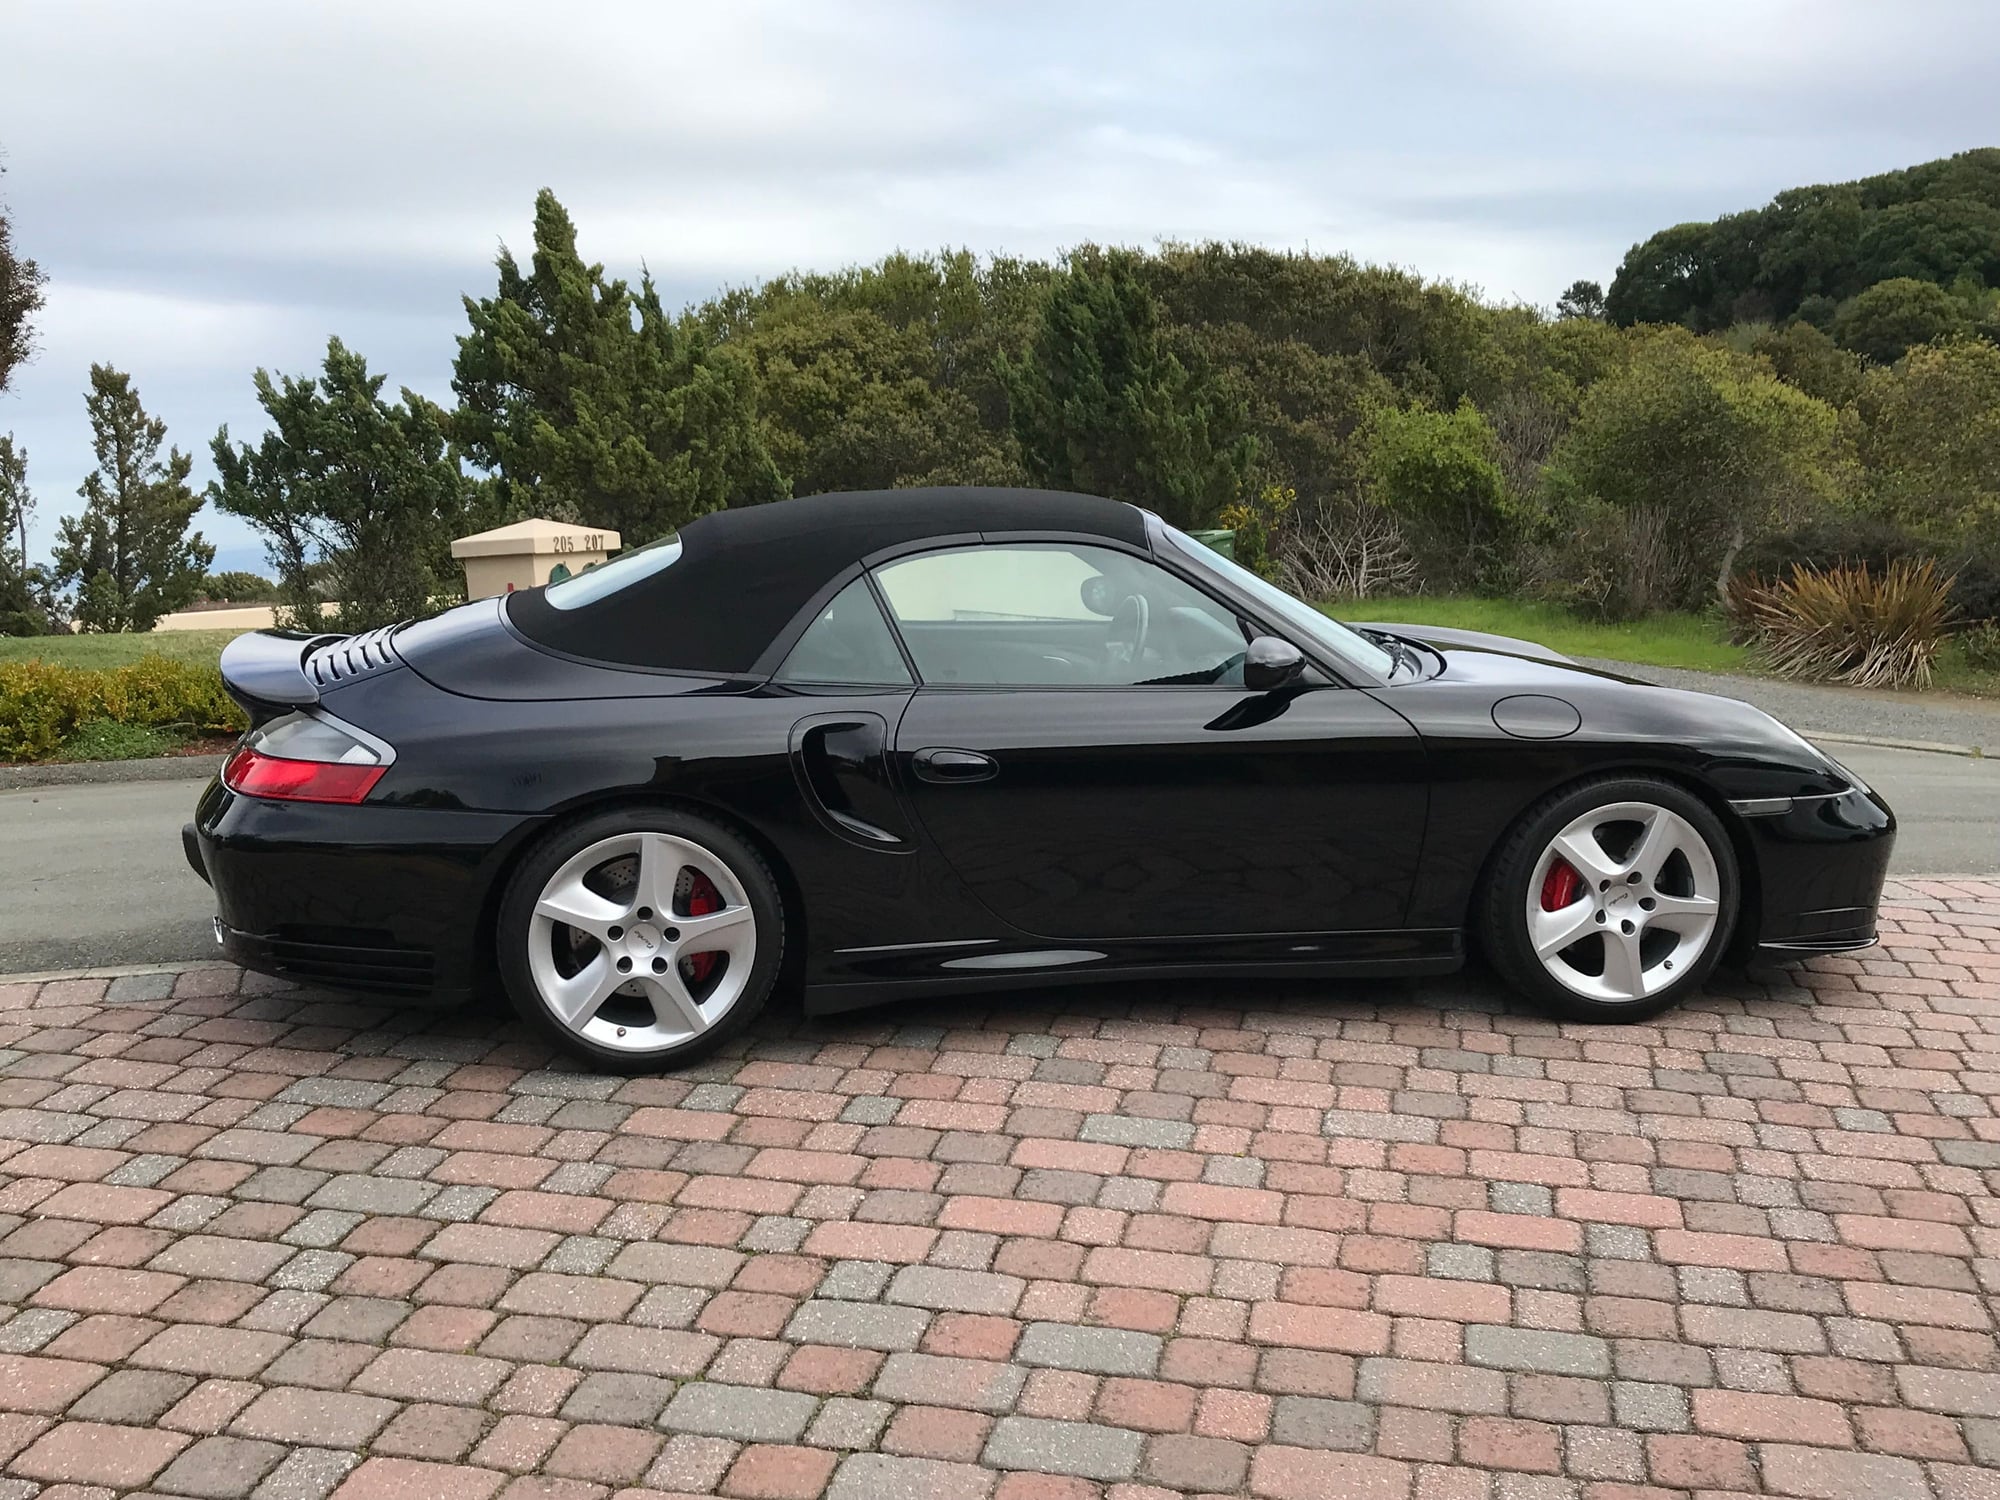 2004 Porsche 911 - Stunning 2004 Porsche 911 turbo cabriolet - Used - VIN wp0cb29994s676672 - 19,500 Miles - 6 cyl - 4WD - Manual - Convertible - Black - Larkspur, CA 94939, United States